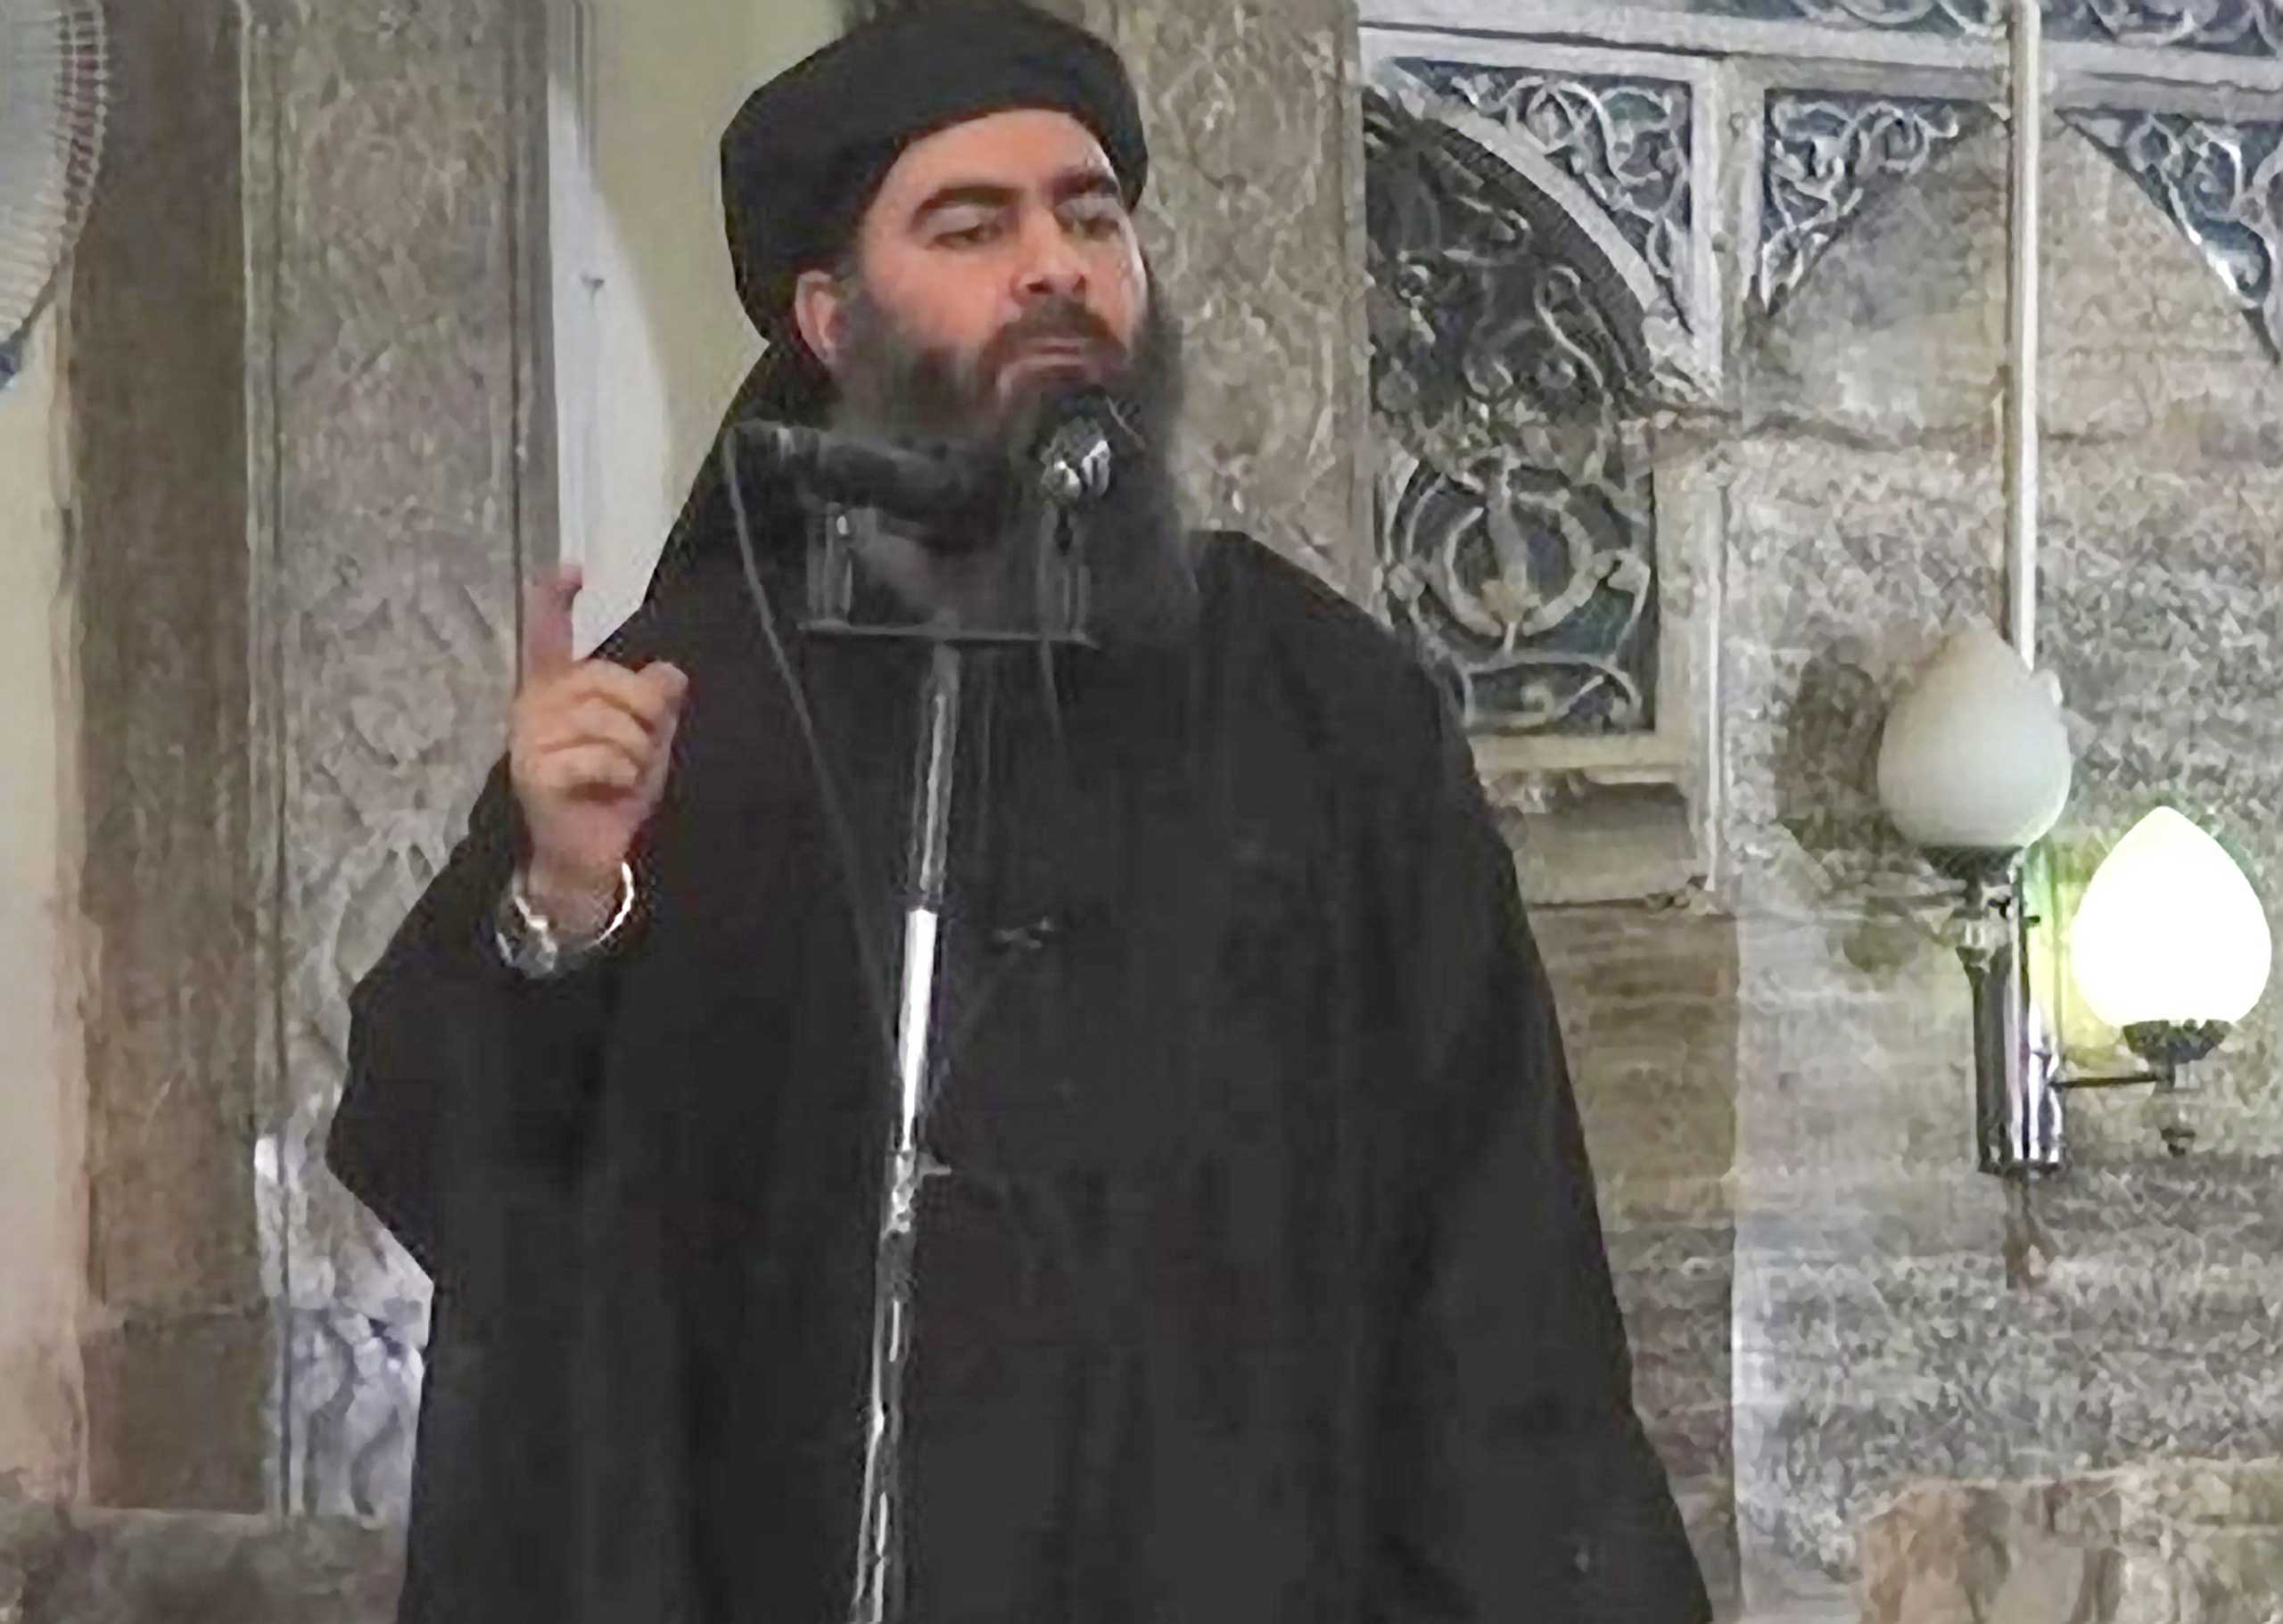 Image purportedly shows the caliph of the self-proclaimed Islamic State, Abu Bakr al-Baghdadi, giving a speech in an unknown location. (EPA)